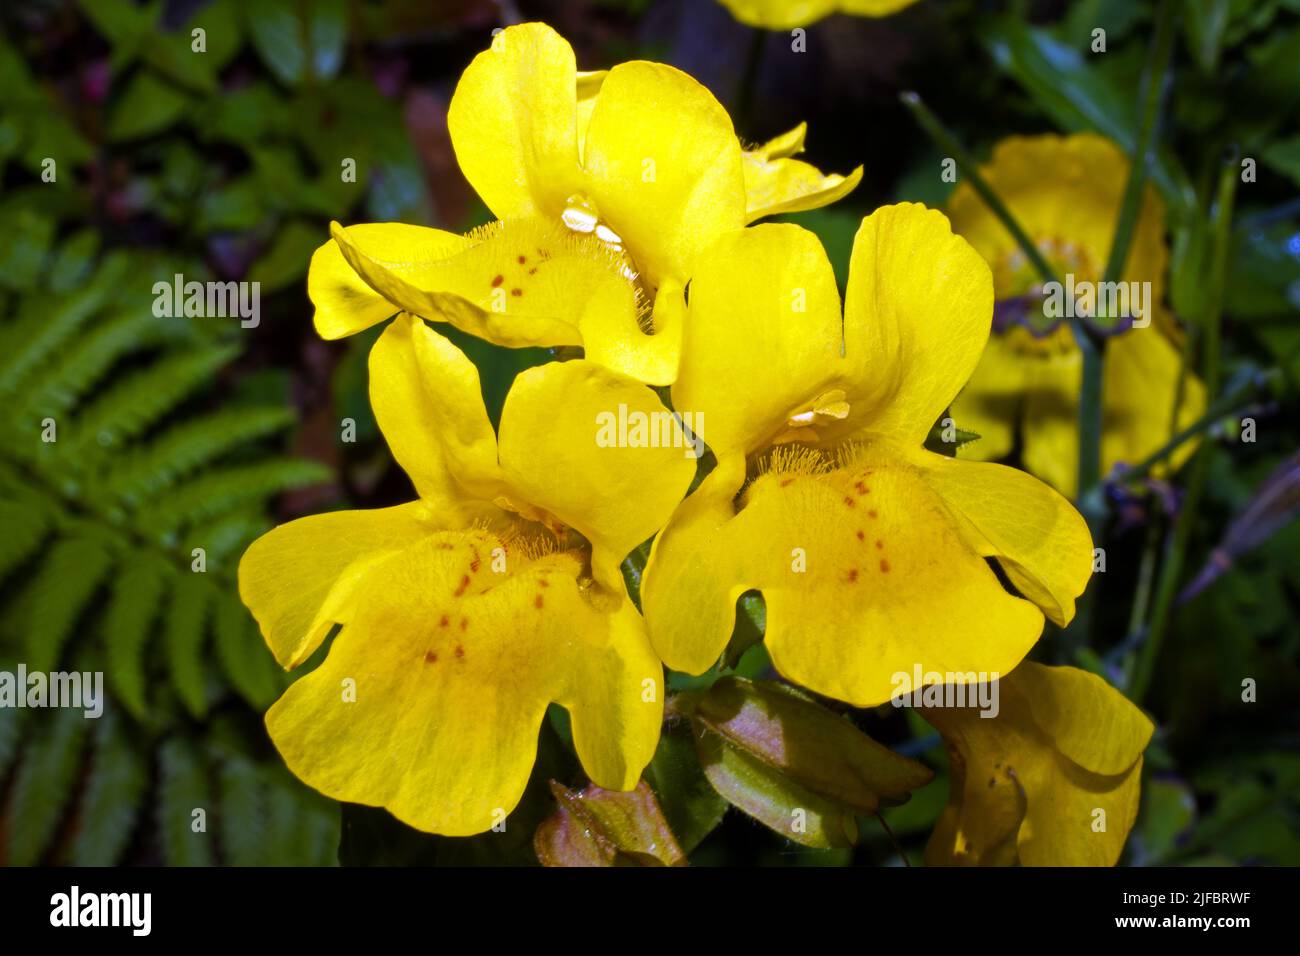 Mimulus guttatus (common yellow monkeyflower) grows along the banks of streams throughout much of western North America but introduced to many places. Stock Photo